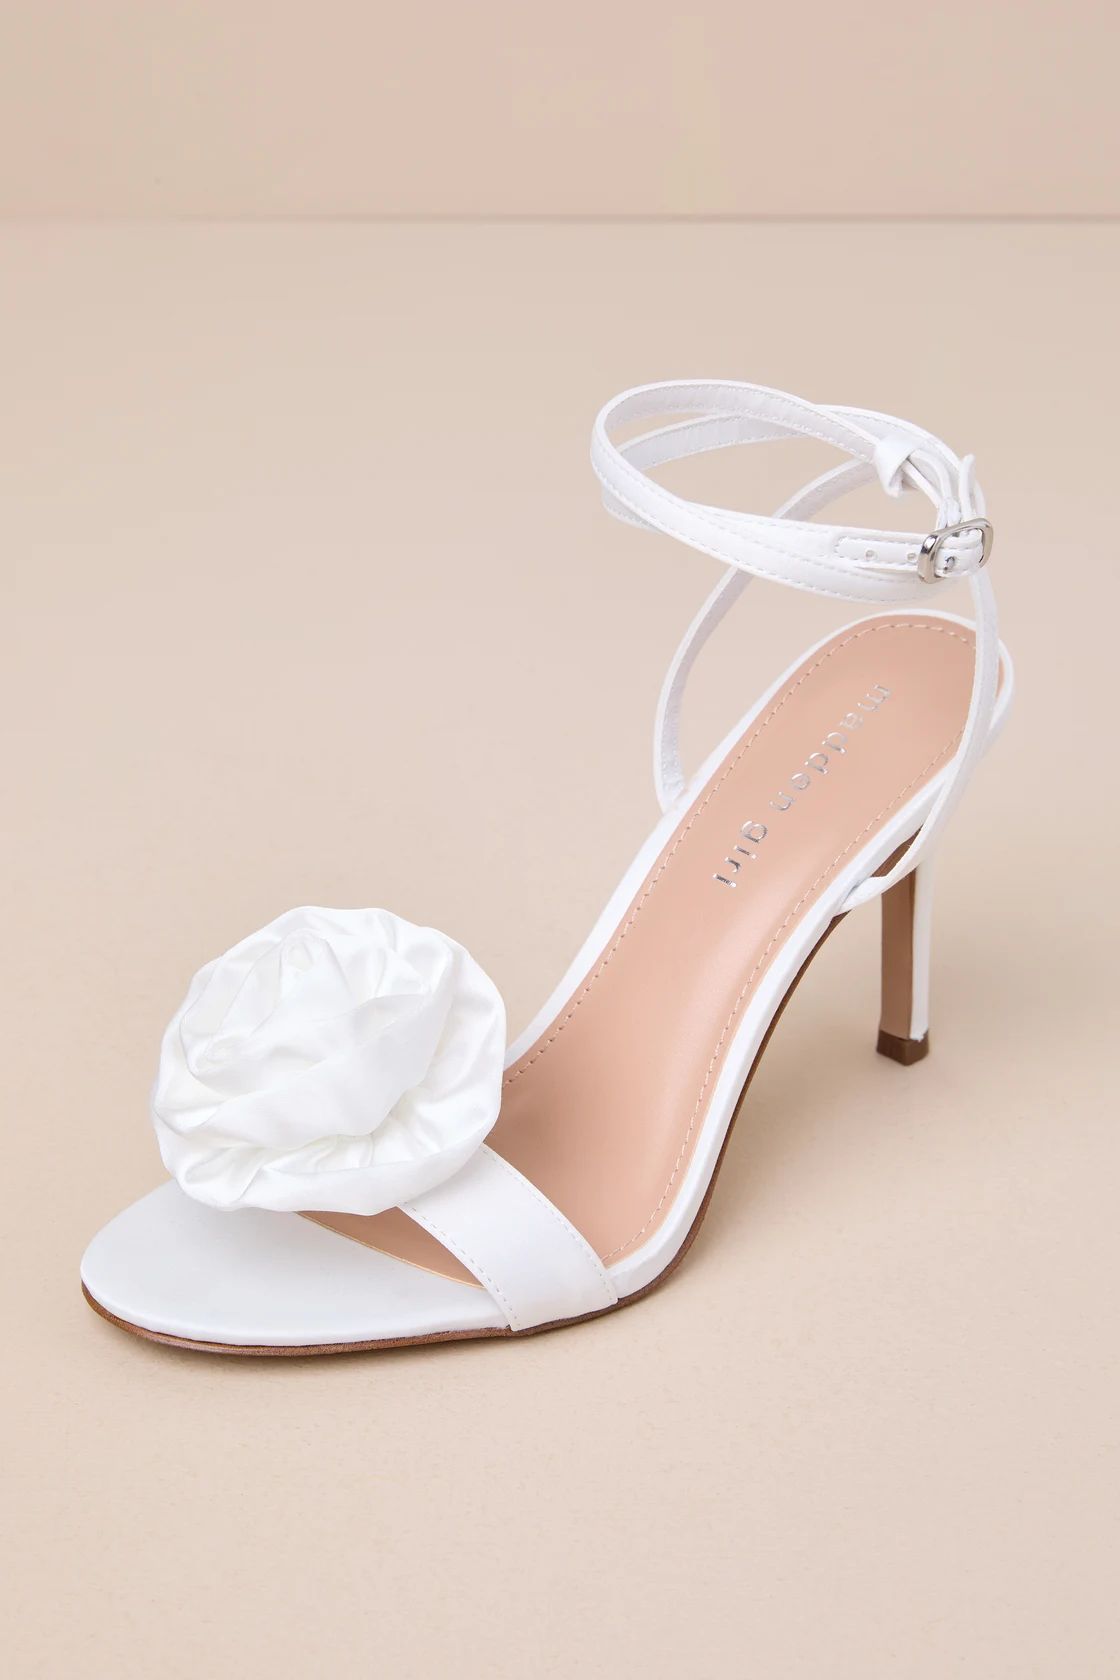 Bloomingg Ivory Rosette Ankle Strap High Heel Sandals | Lulus